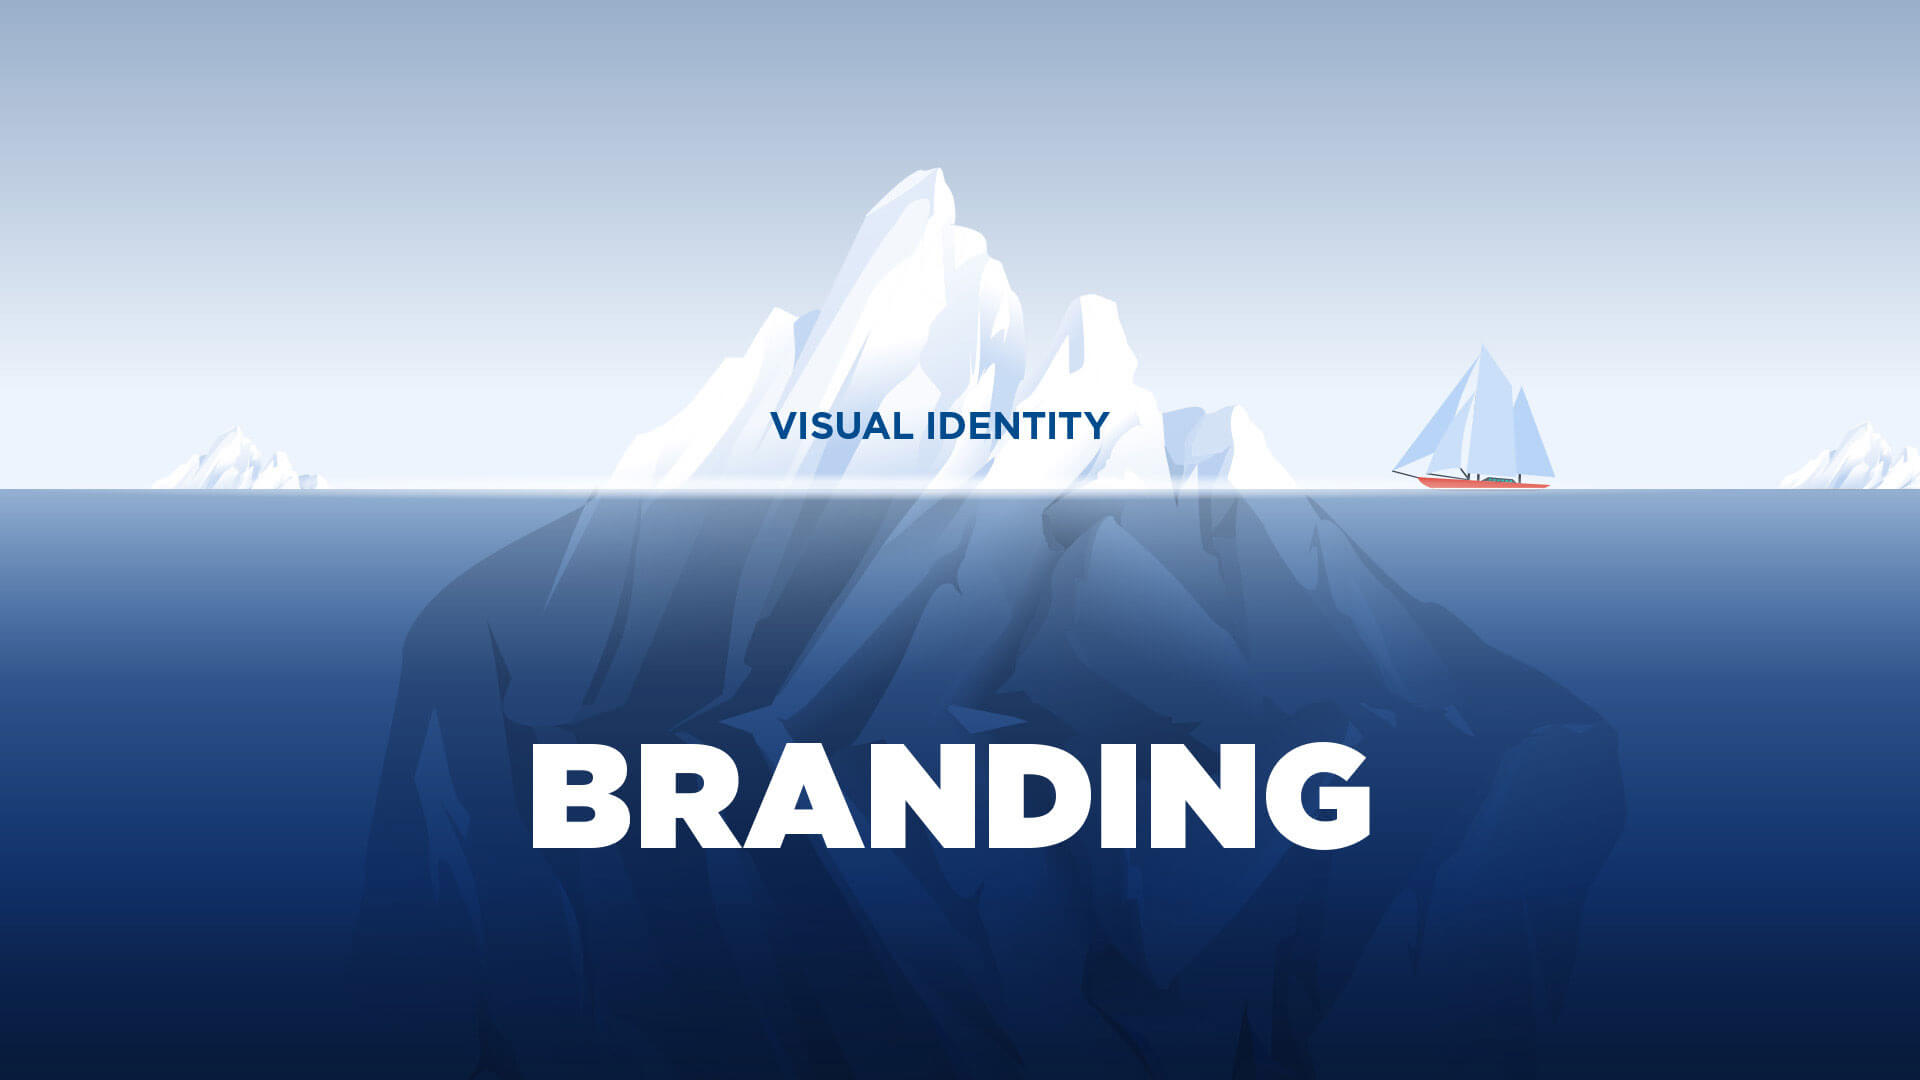 With branding, visual identity is just the tip of the iceberg